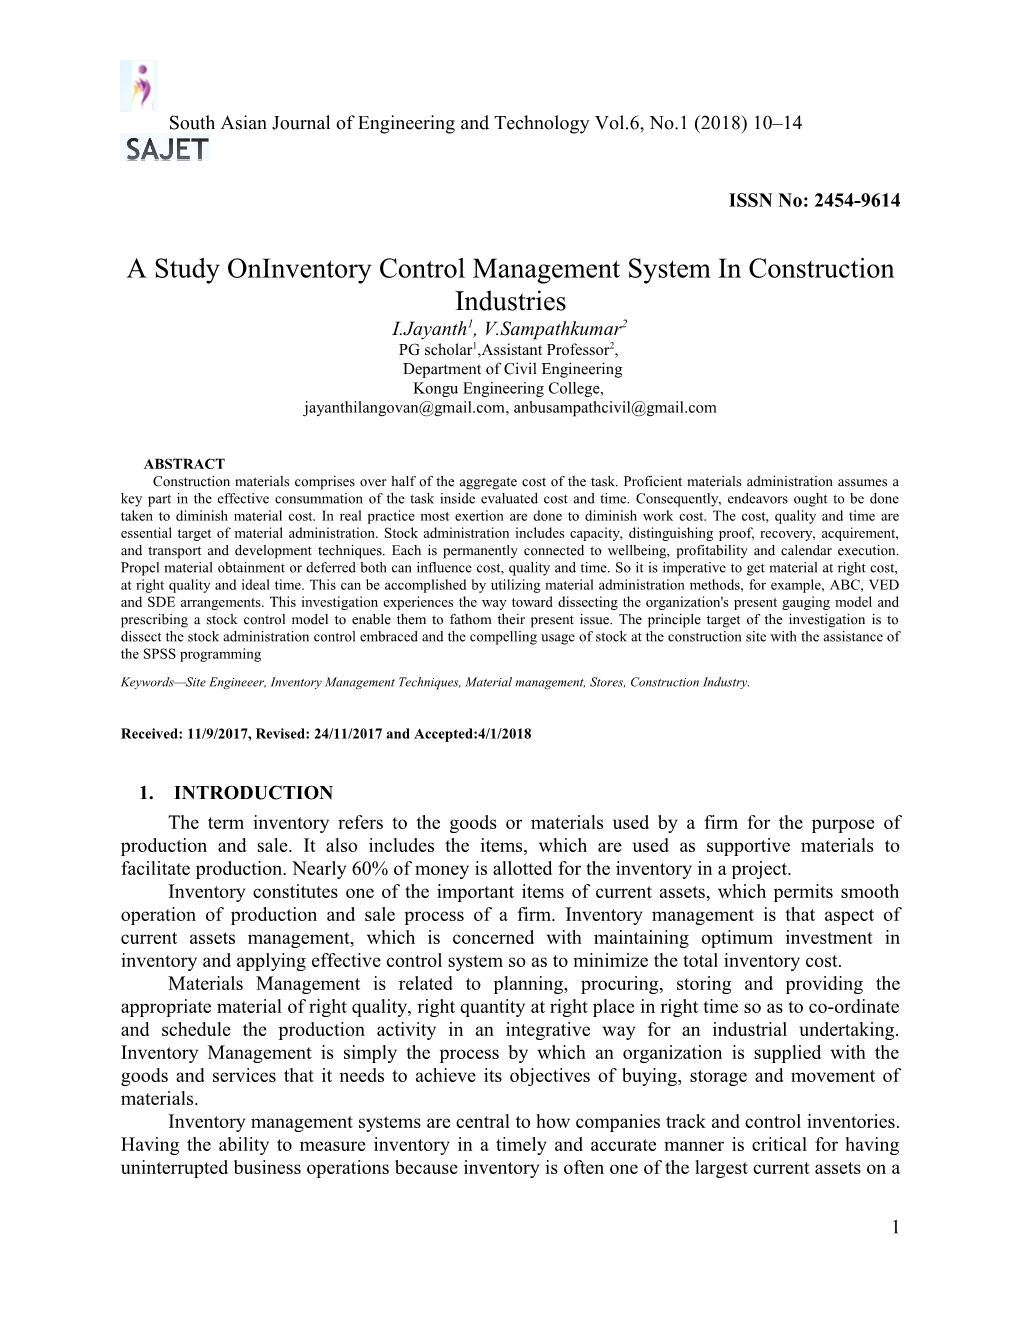 A Study Oninventory Control Management System in Construction Industries